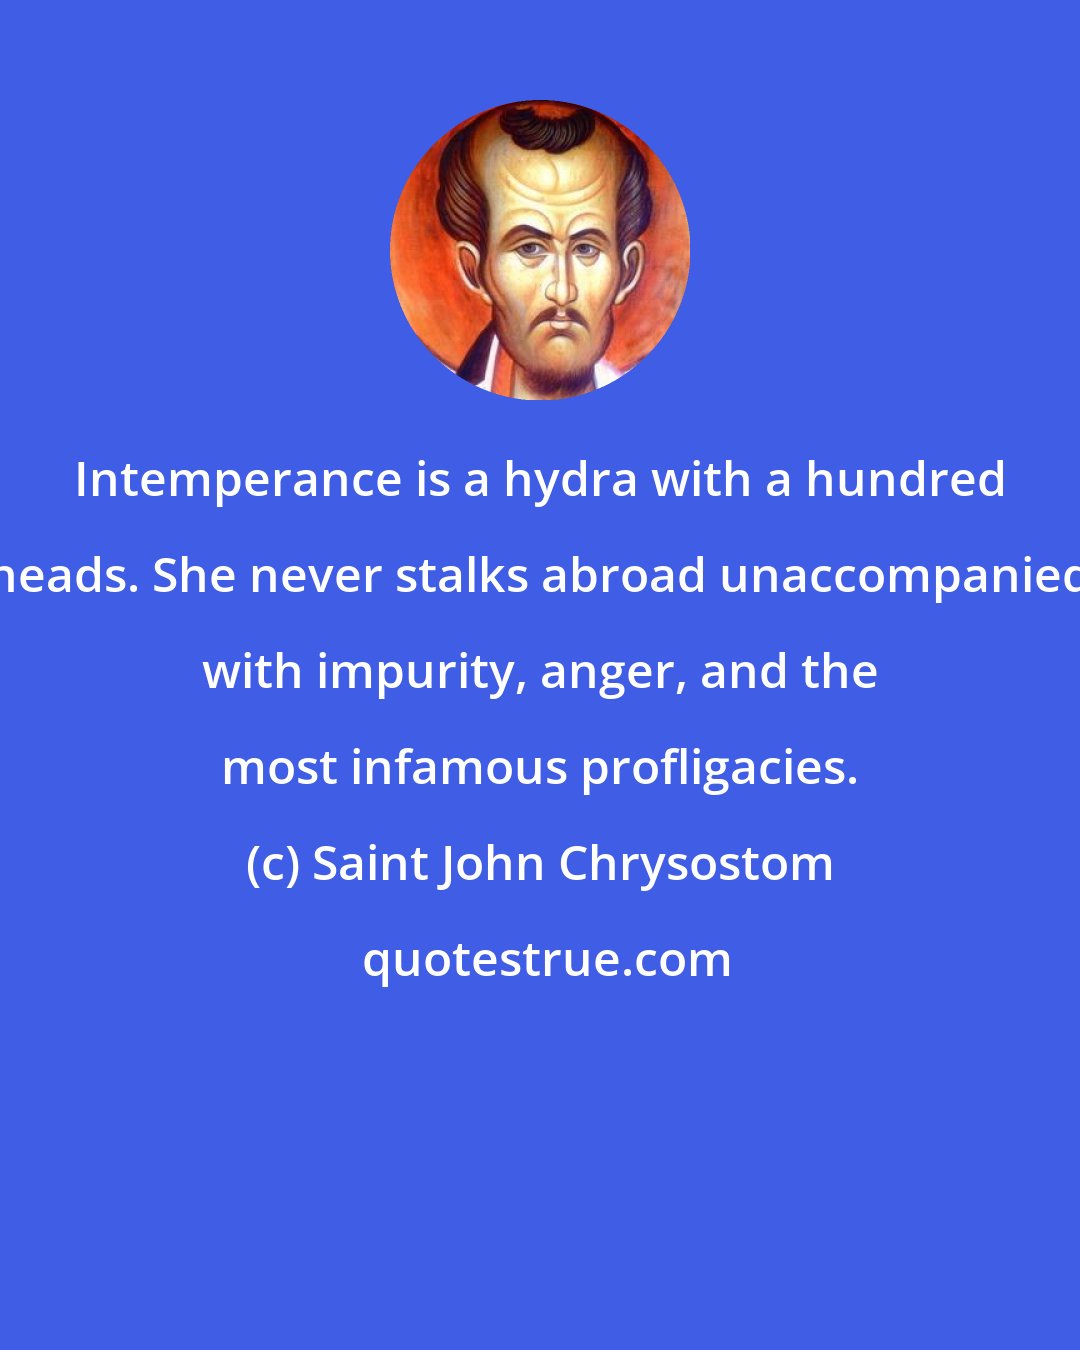 Saint John Chrysostom: Intemperance is a hydra with a hundred heads. She never stalks abroad unaccompanied with impurity, anger, and the most infamous profligacies.